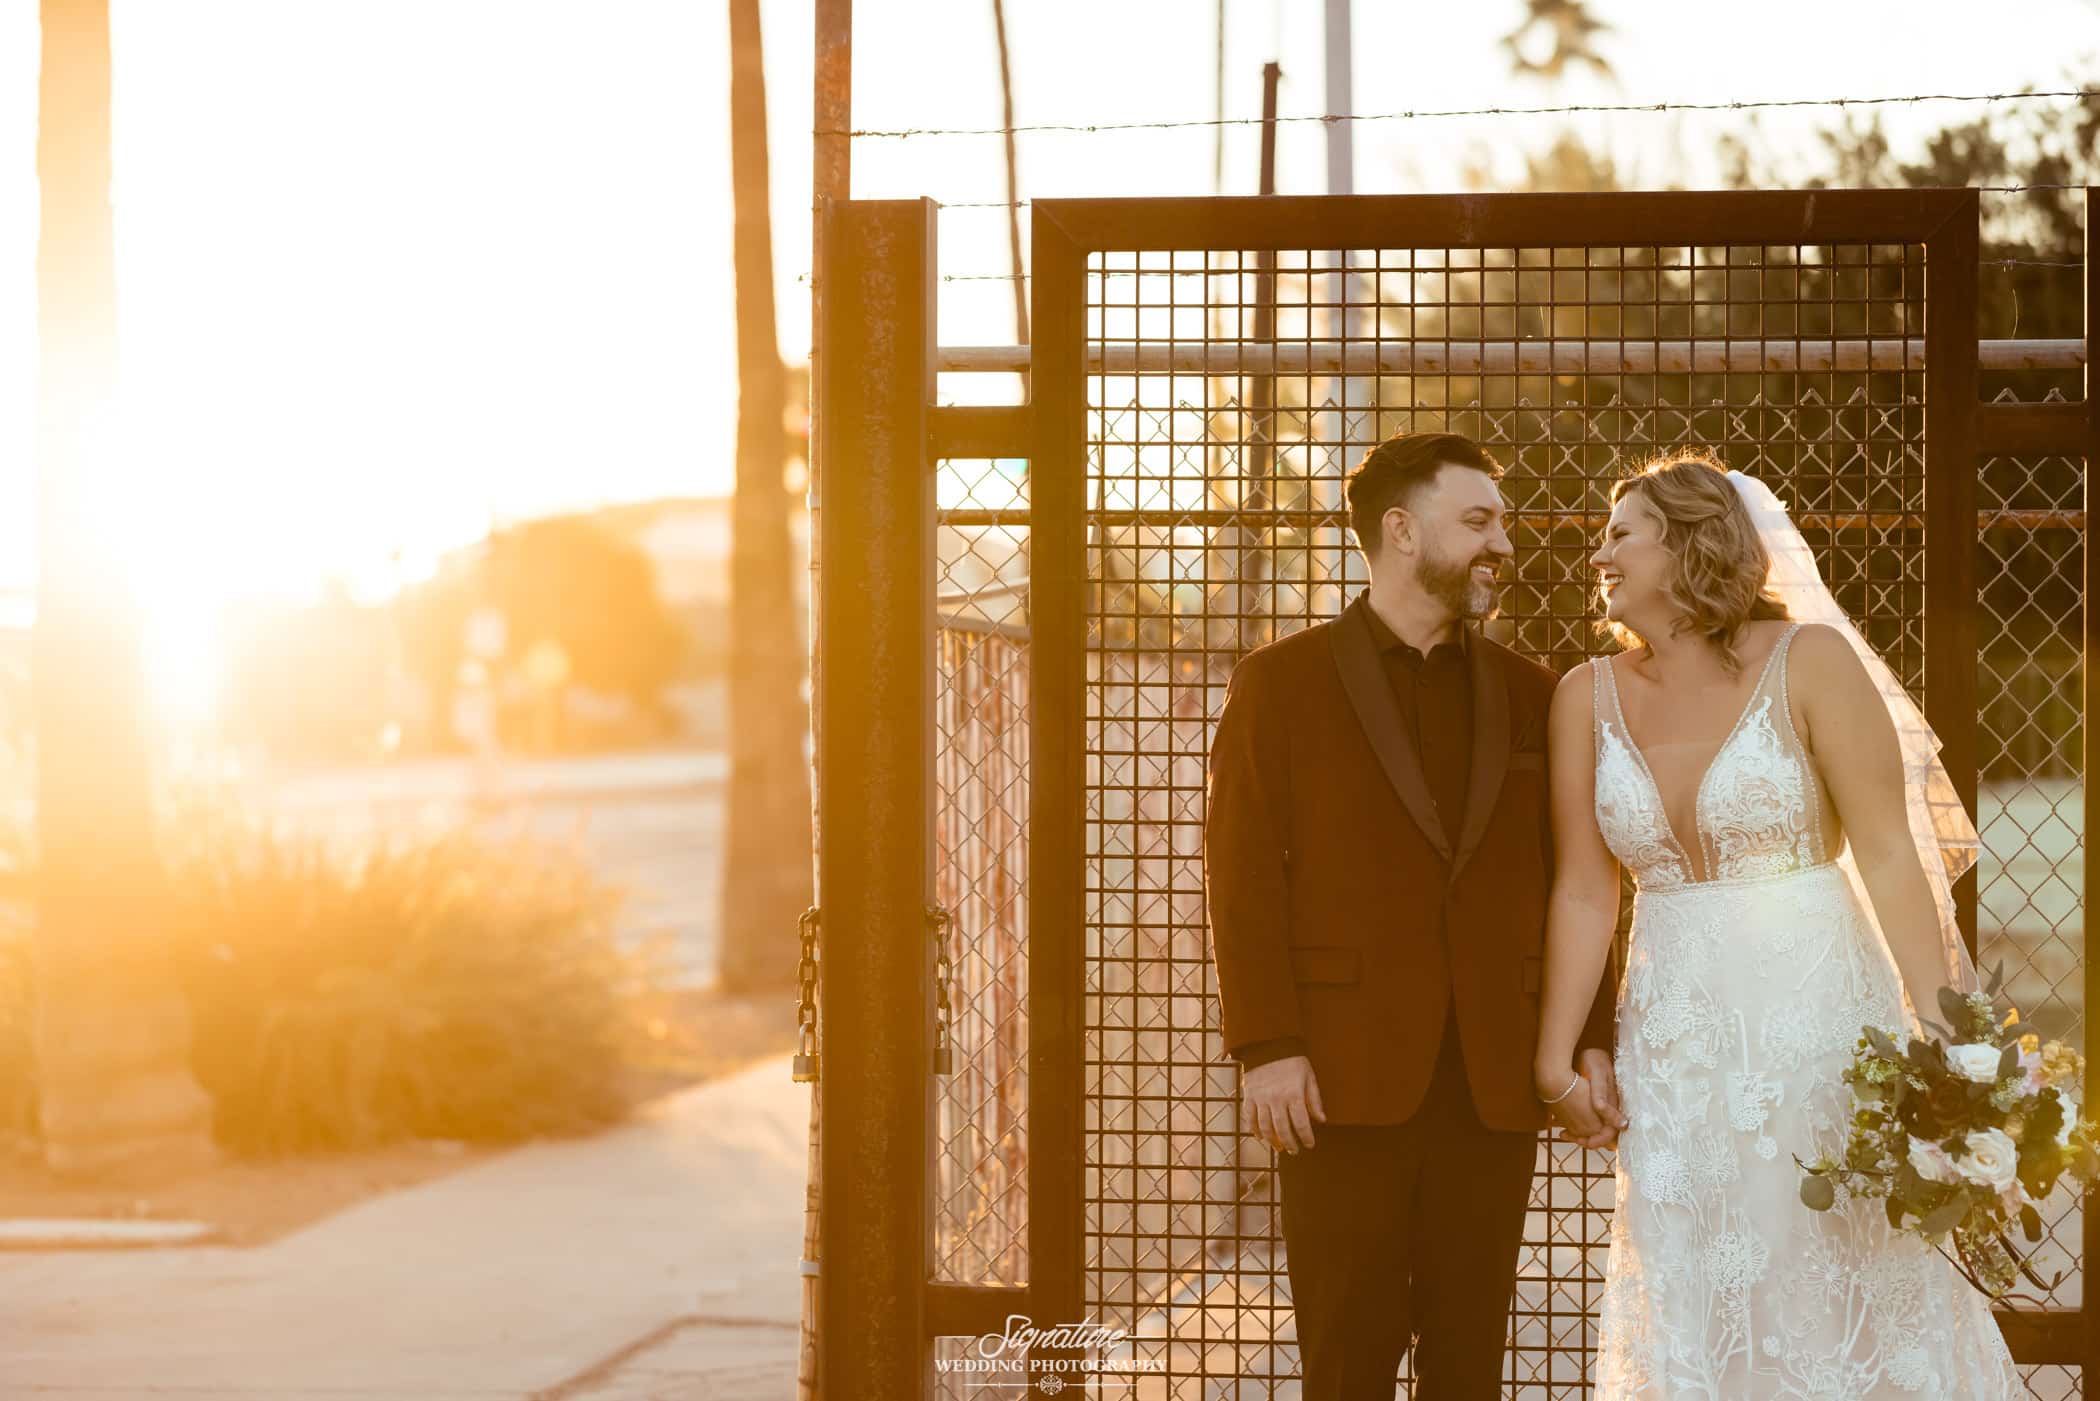 Bride and groom smiling at each other in front of fence